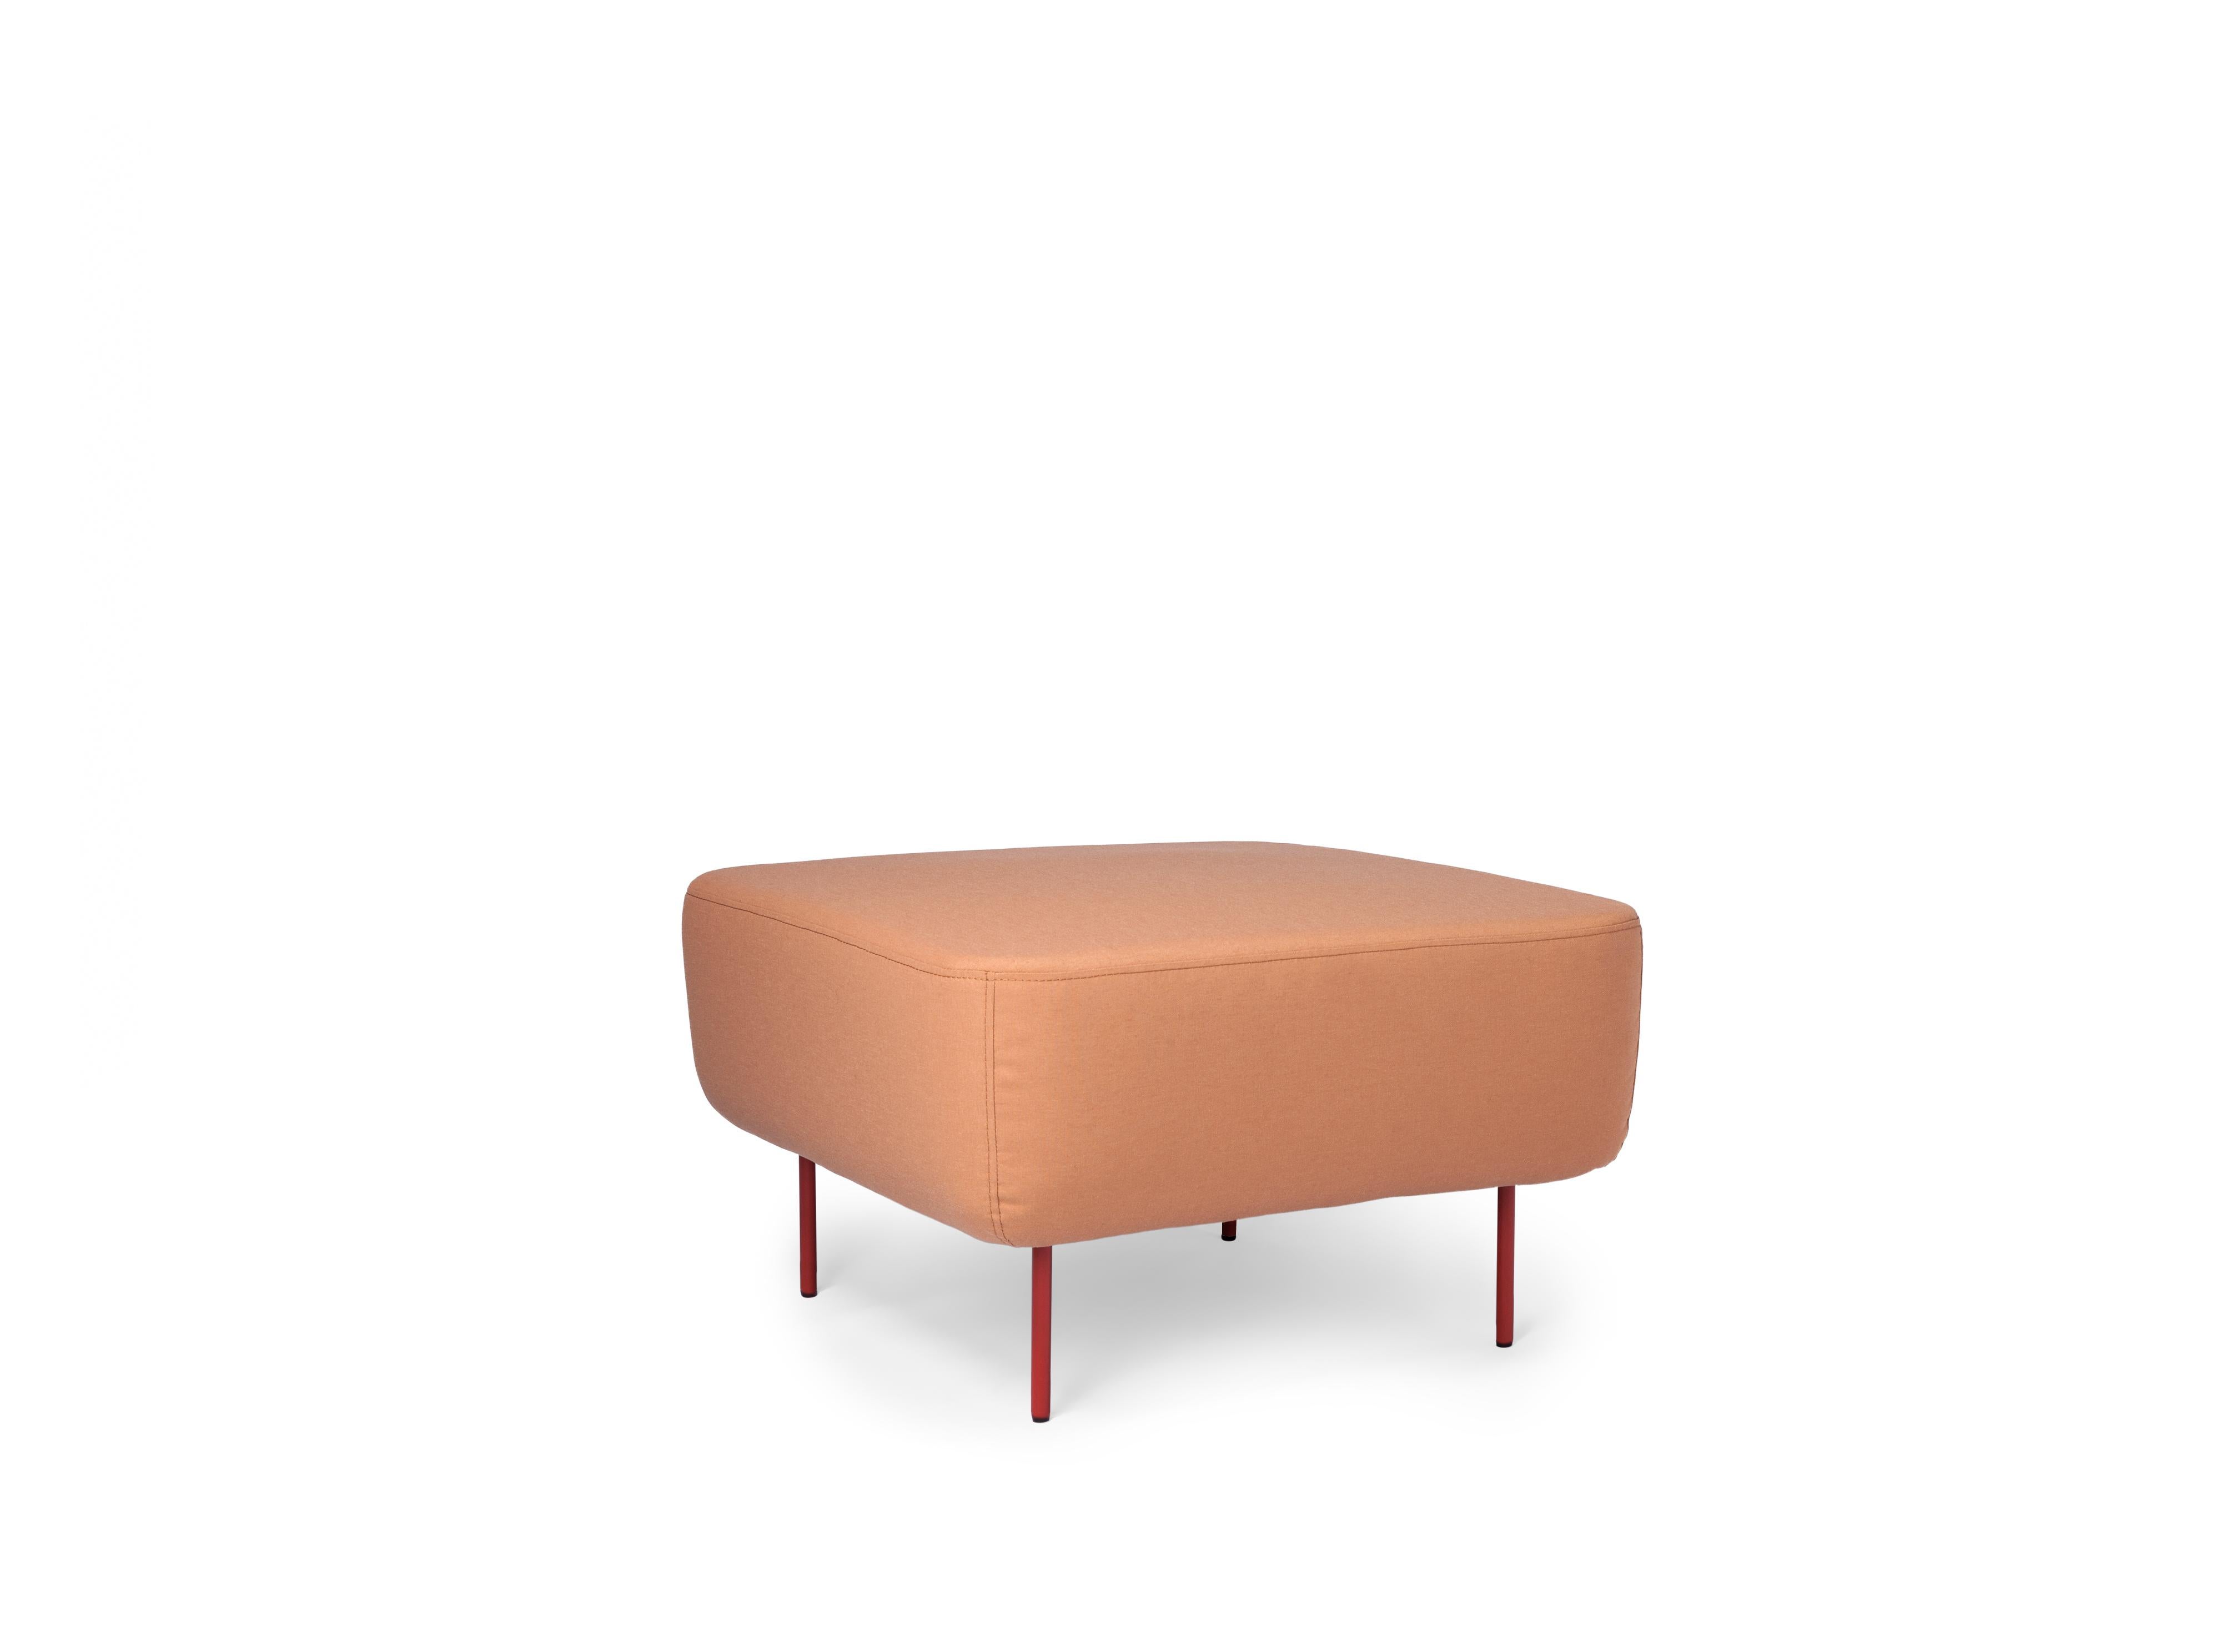 Petite Friture Medium Hoff Stool in Peach by Morten & Jonas, 2015

Hoff created by designer duo Morten & Jonas is a collection of two modular stools and two modular armchairs. they can combine to make a sofa as well an entire living room area.